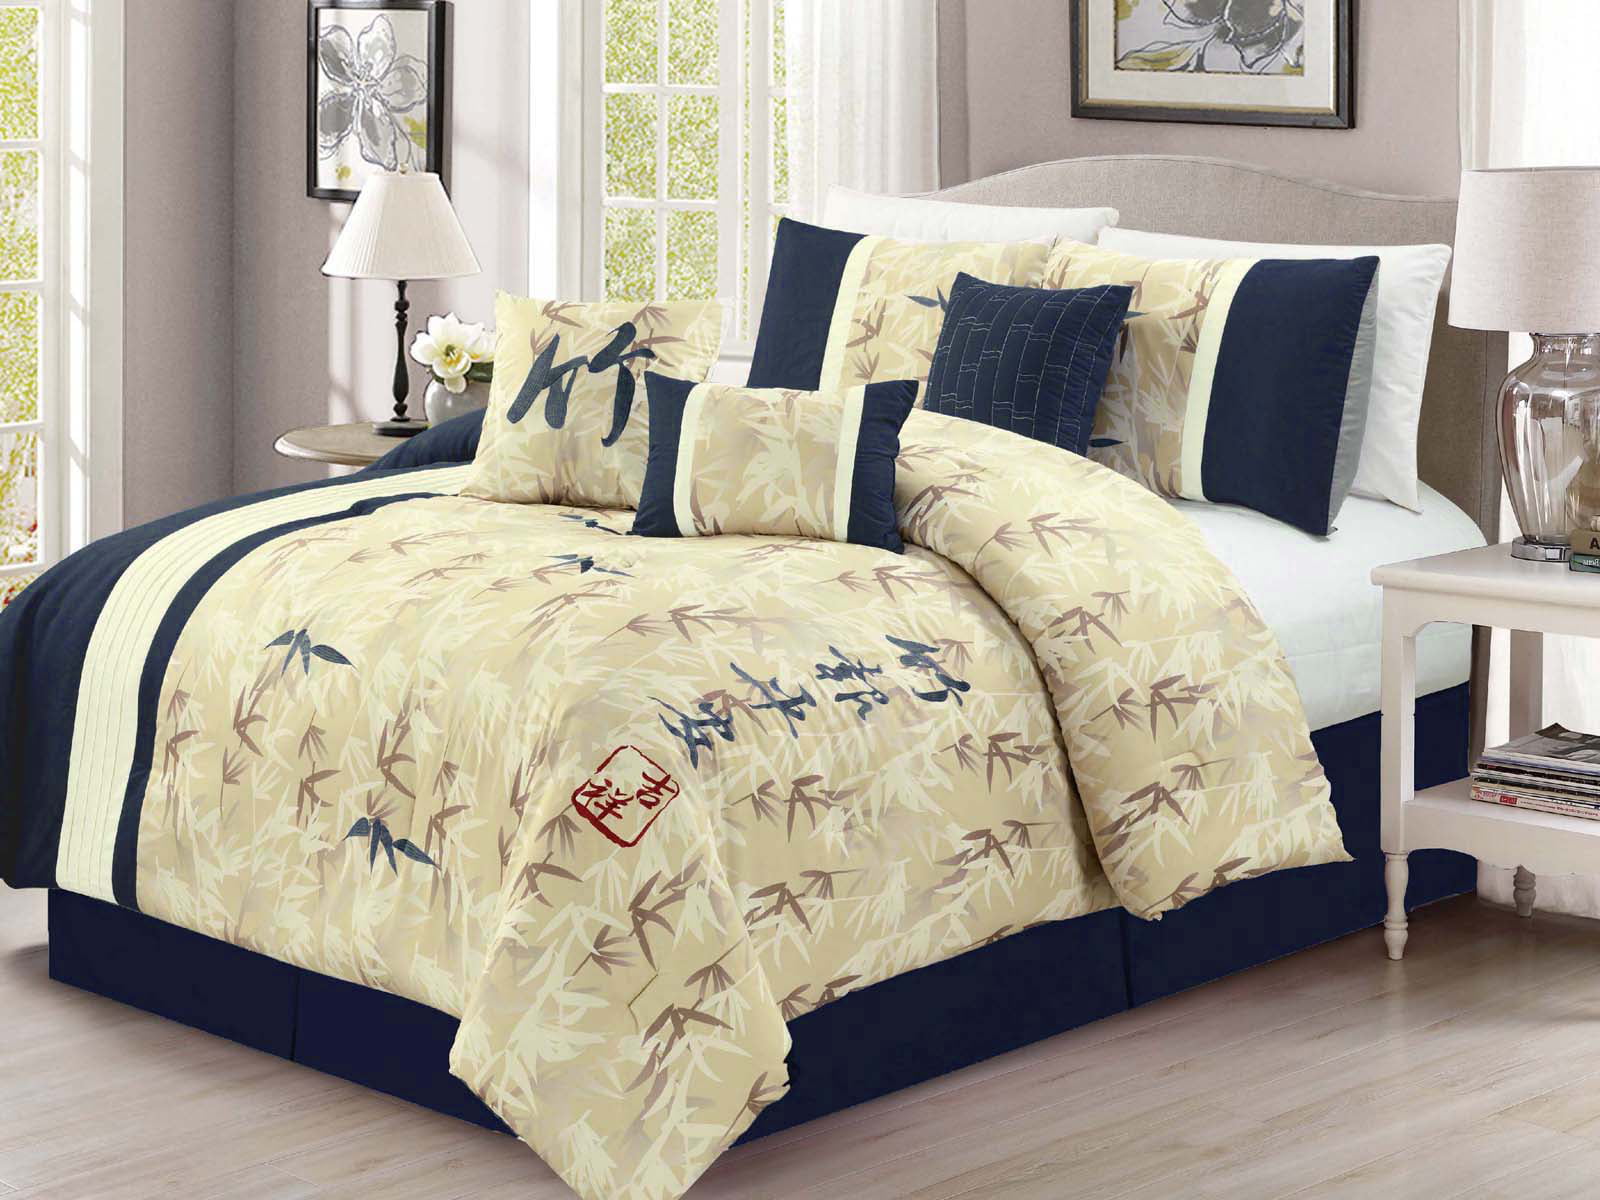 image: 11-Pc Bamboo Forest Auspicious Kanji Character Comforter Curtain Set Blue Beige Ivory King